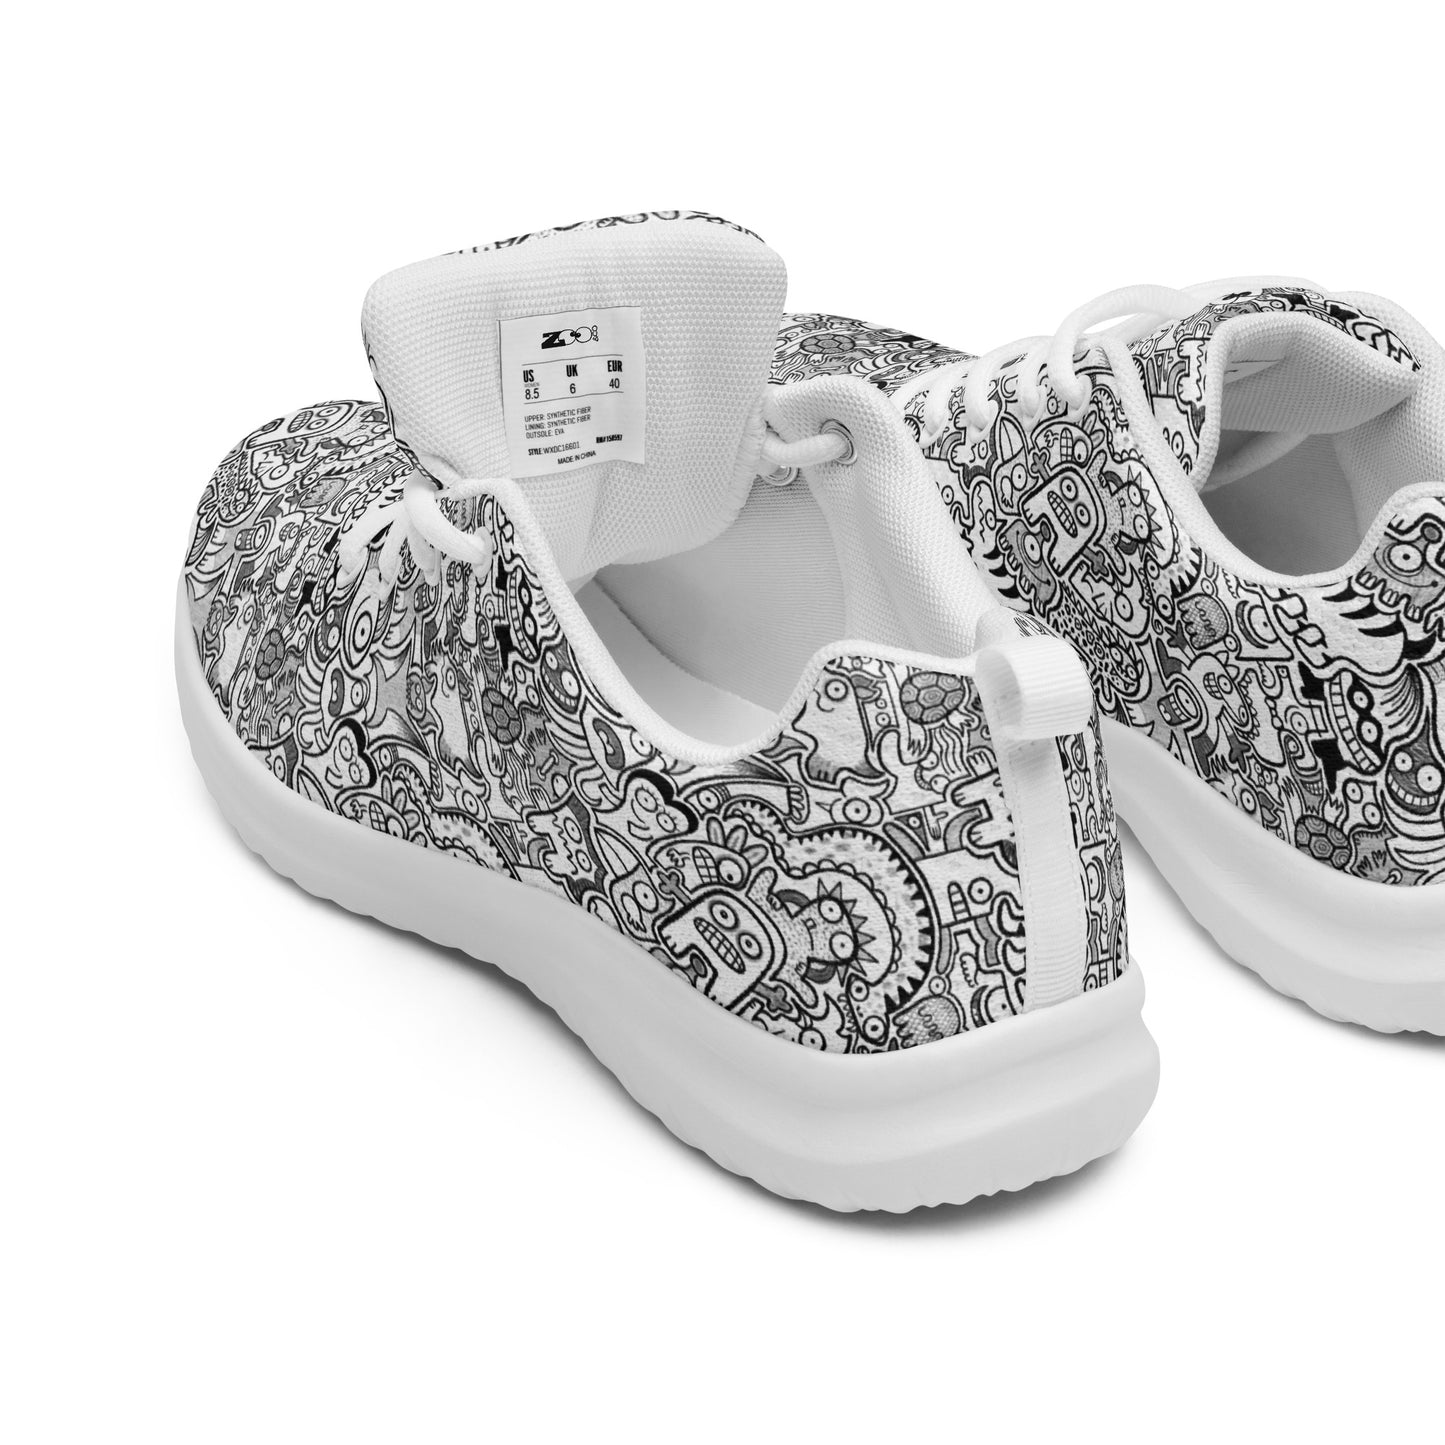 Fill your world with cool Doodles Men’s athletic shoes. Detail of the product